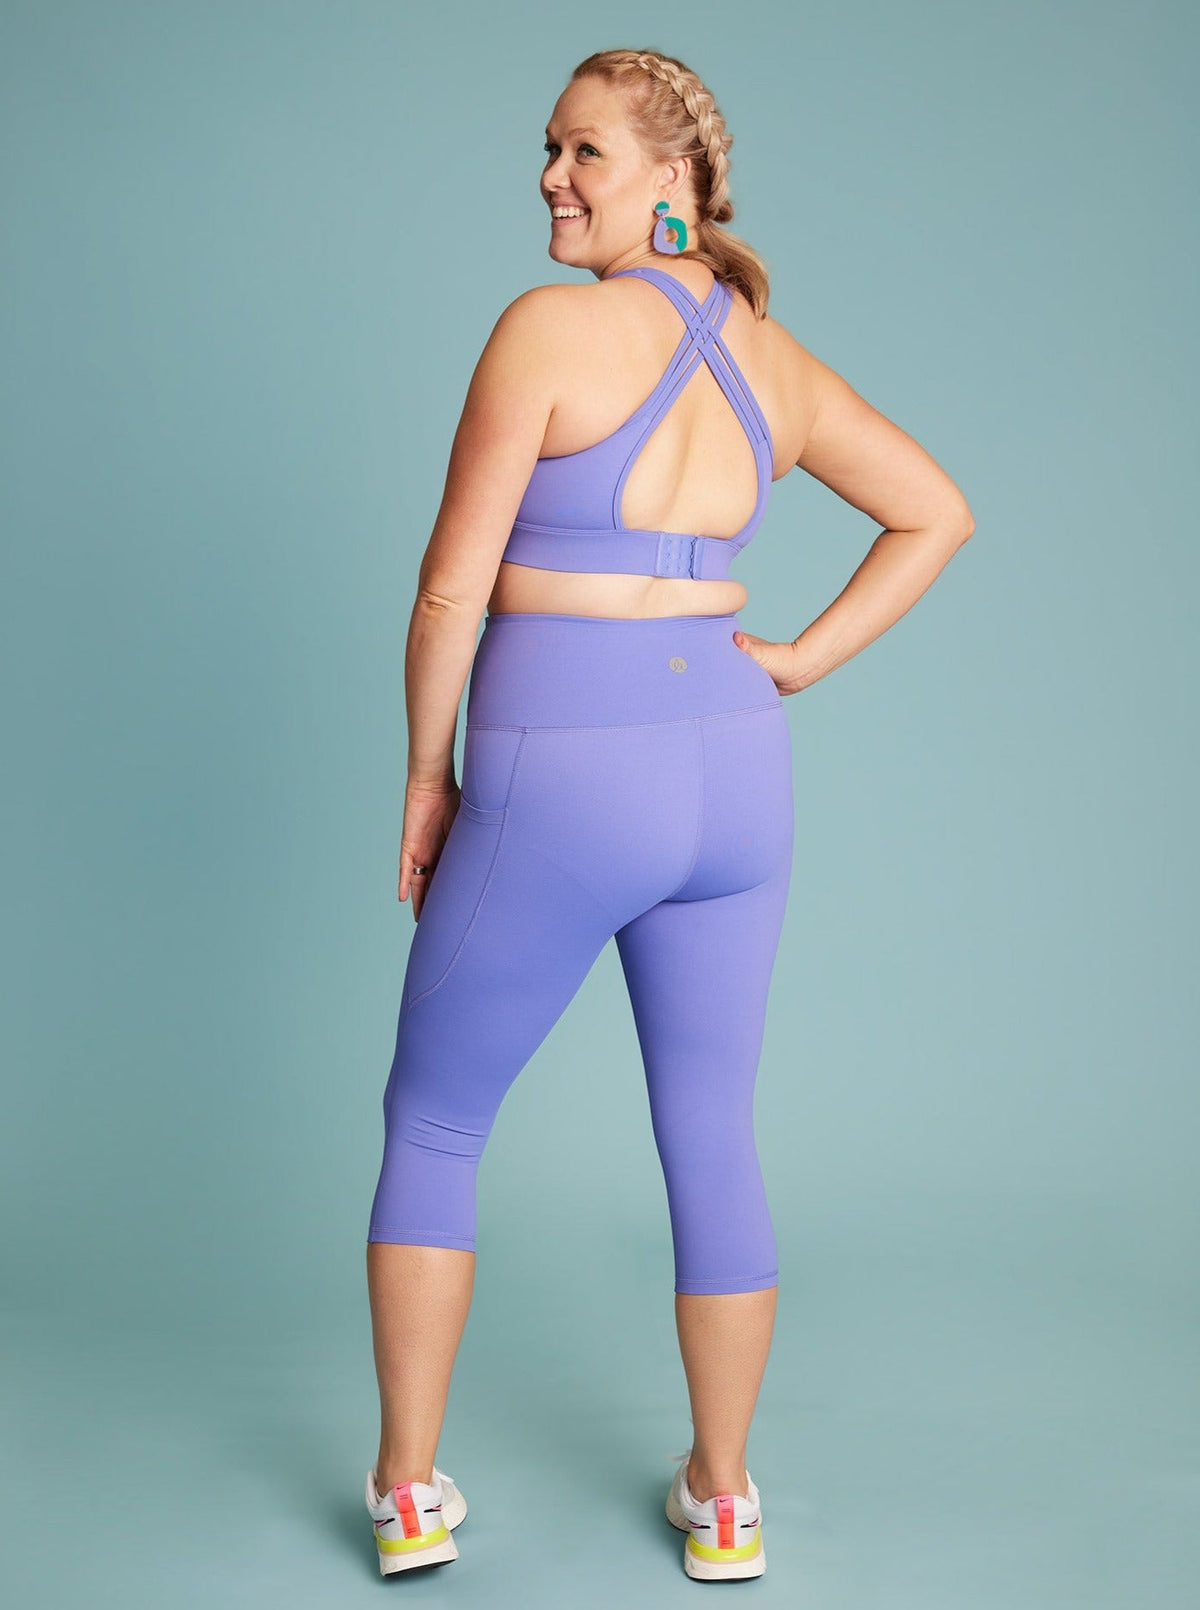 Periwinkle Purple Everyday Cropped Legging - 3/4 length - capris length running tights